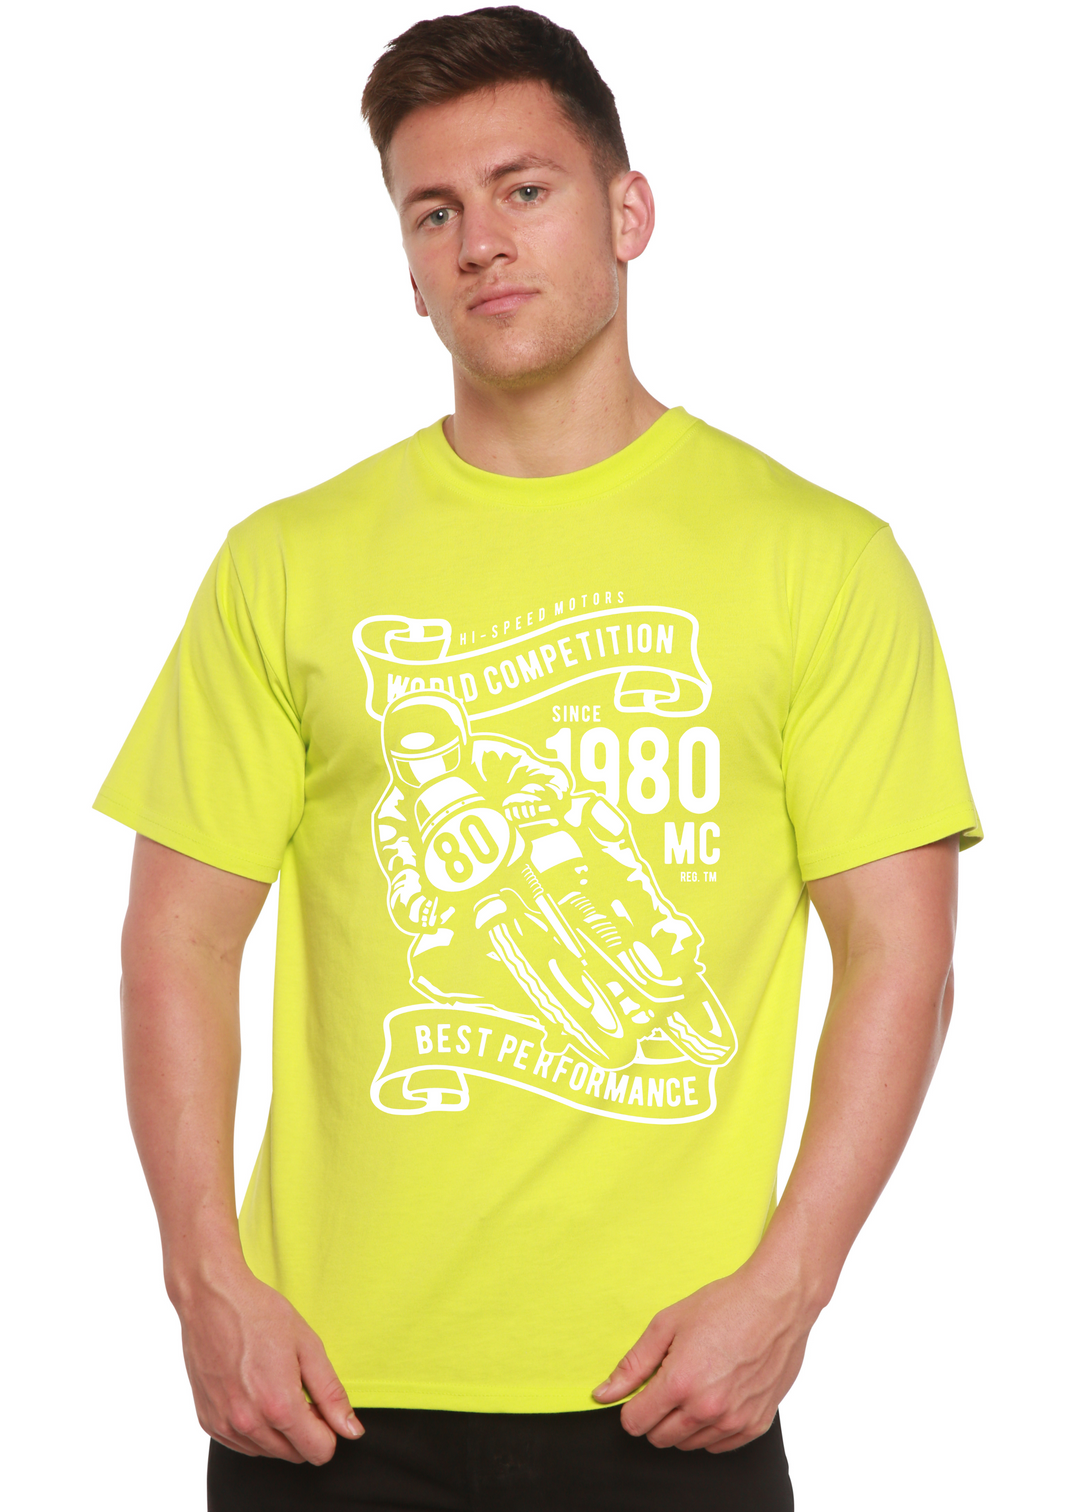 World Competition men's bamboo tshirt lime punch